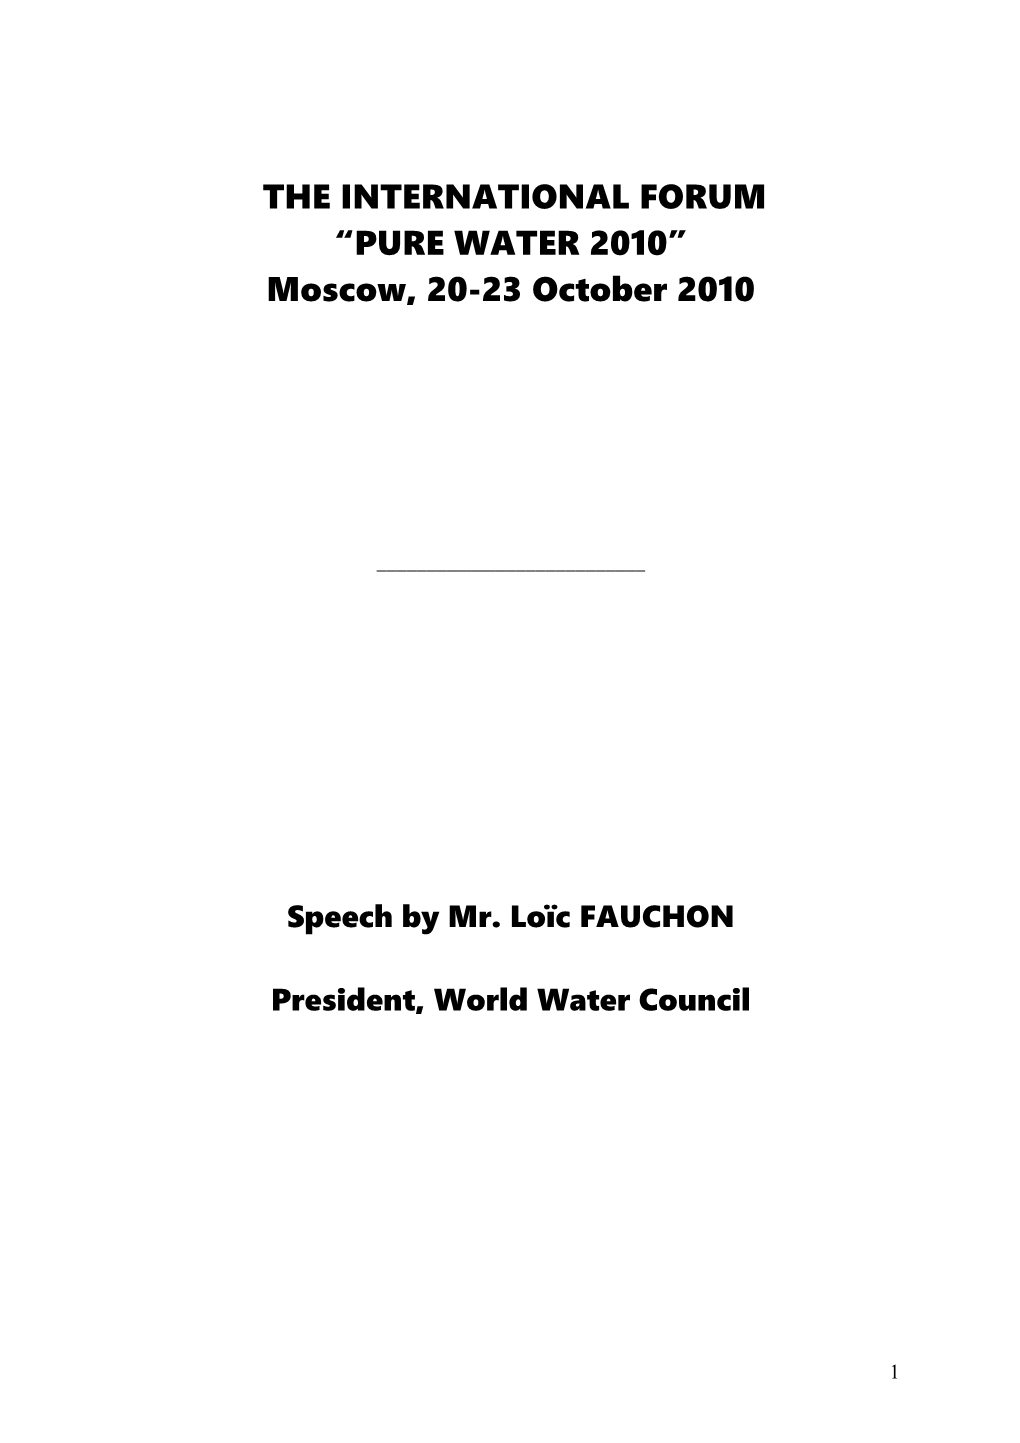 Message from Loic Fauchon for the Pure Water Forum